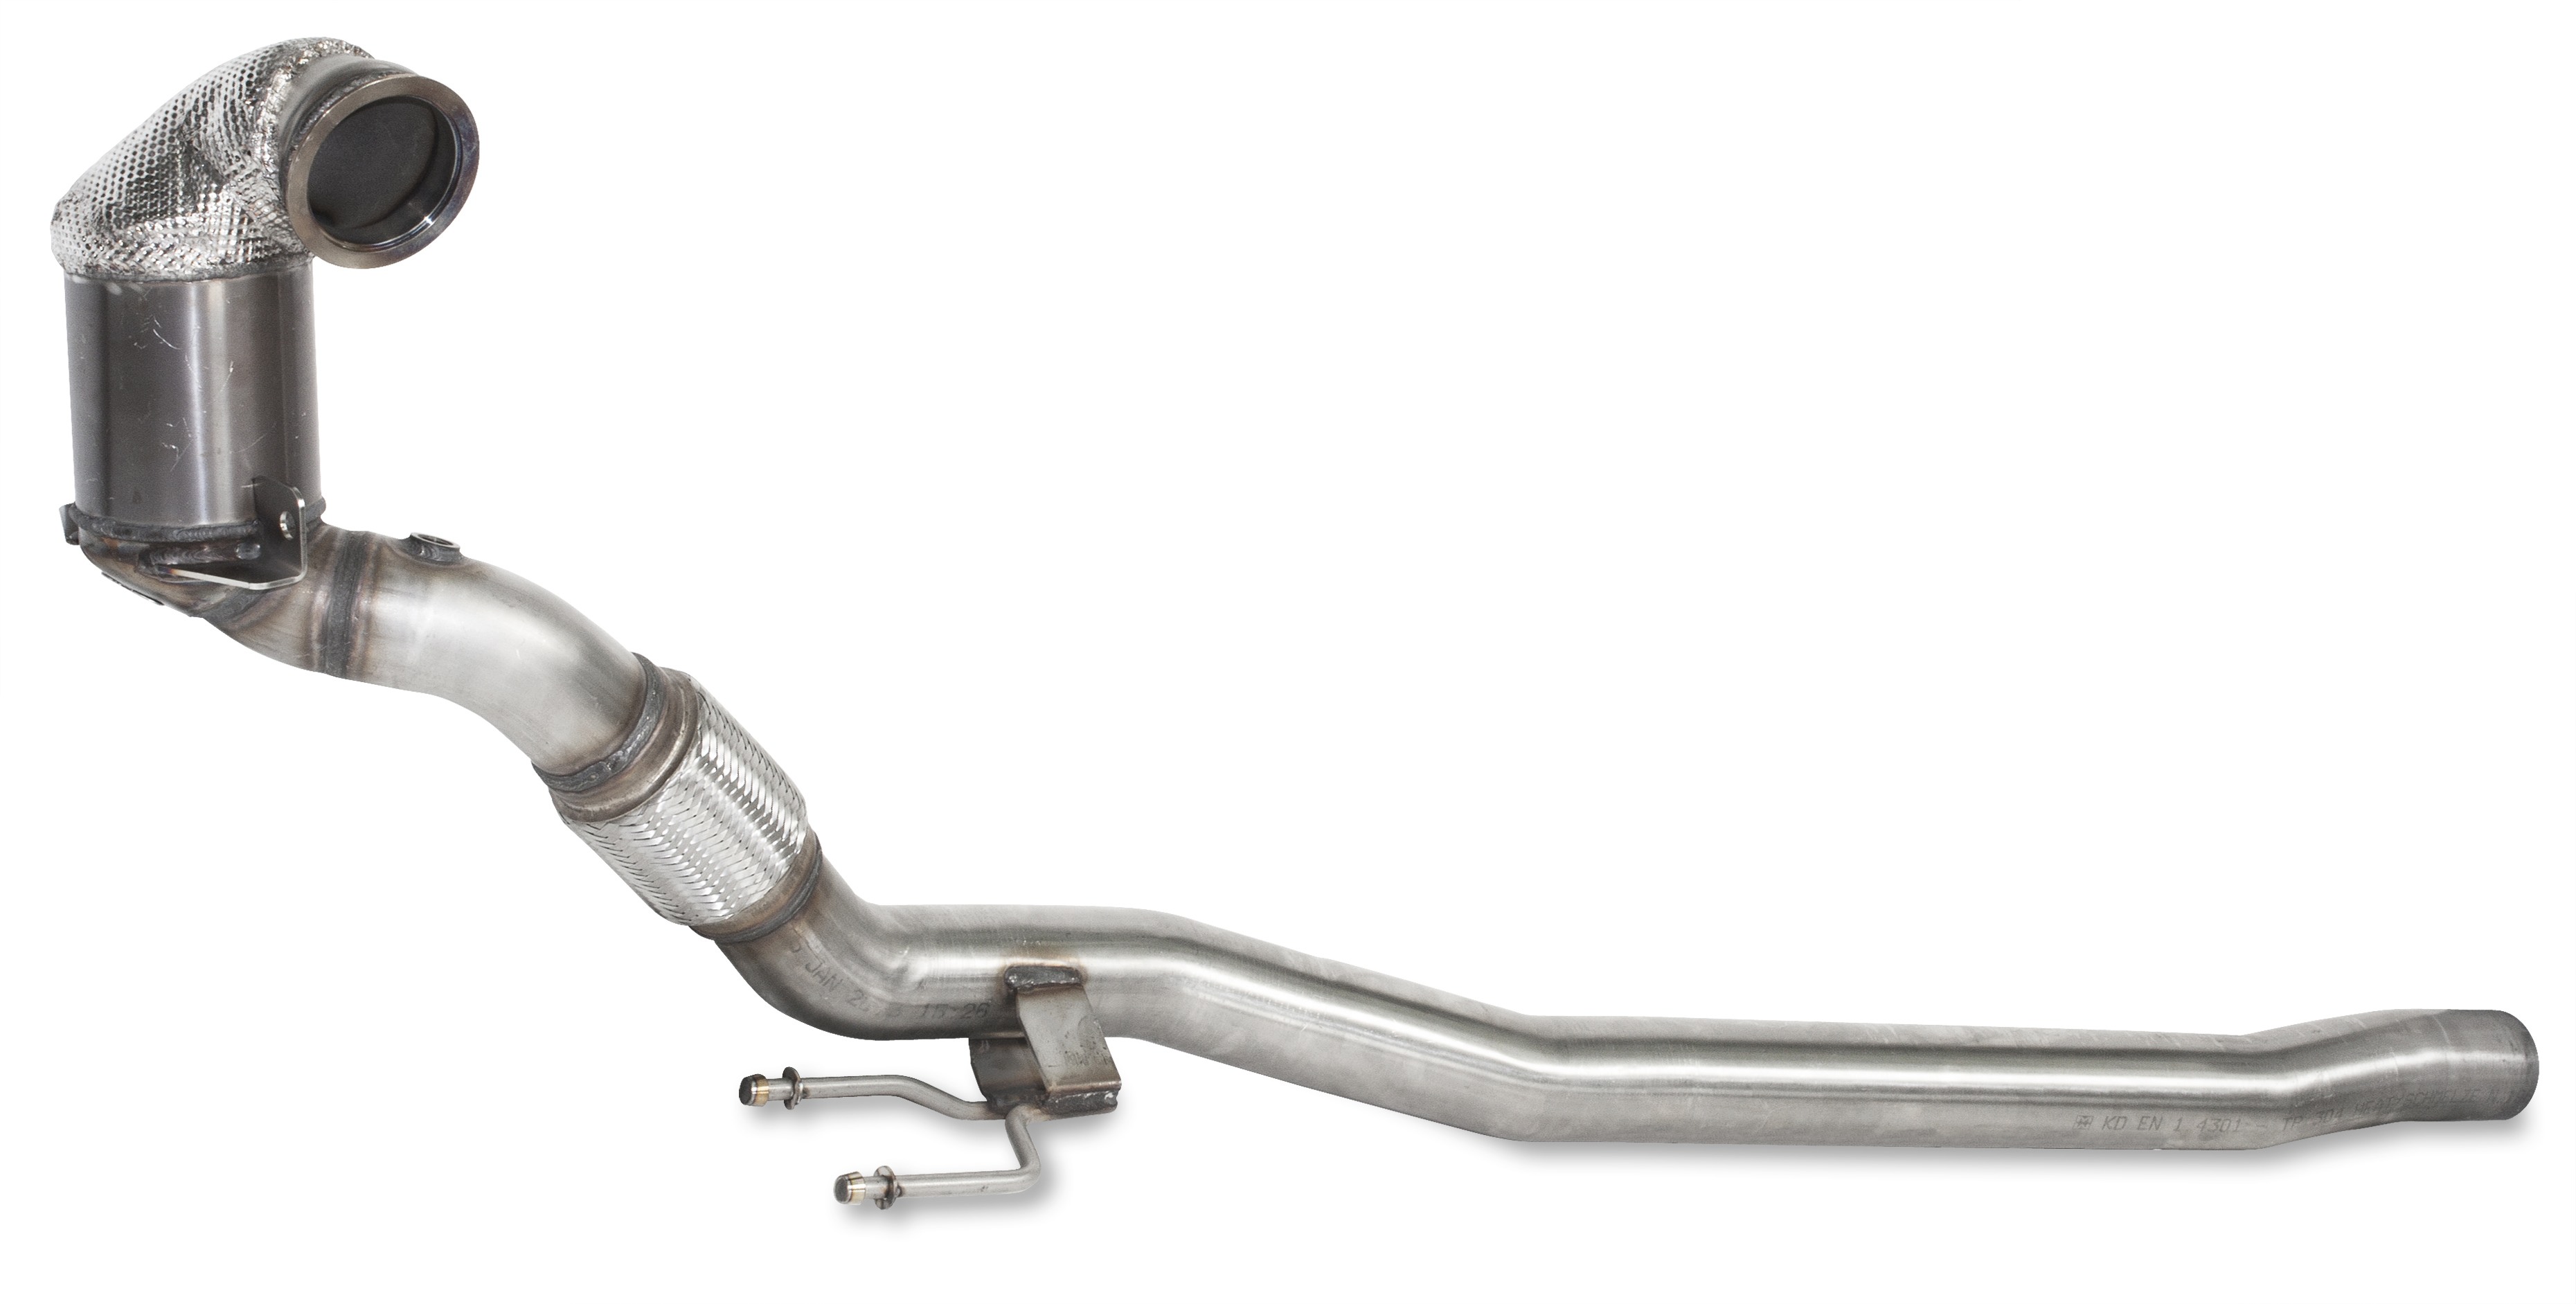 HJS downpipe VW Golf 7 R 2.0 TSI, 76 mm, ECE approved, Golf R (2.0 - EURO  6), Golf 7, VW, HJS Down Pipes, Downpipes & Kats, Exhaust Technology